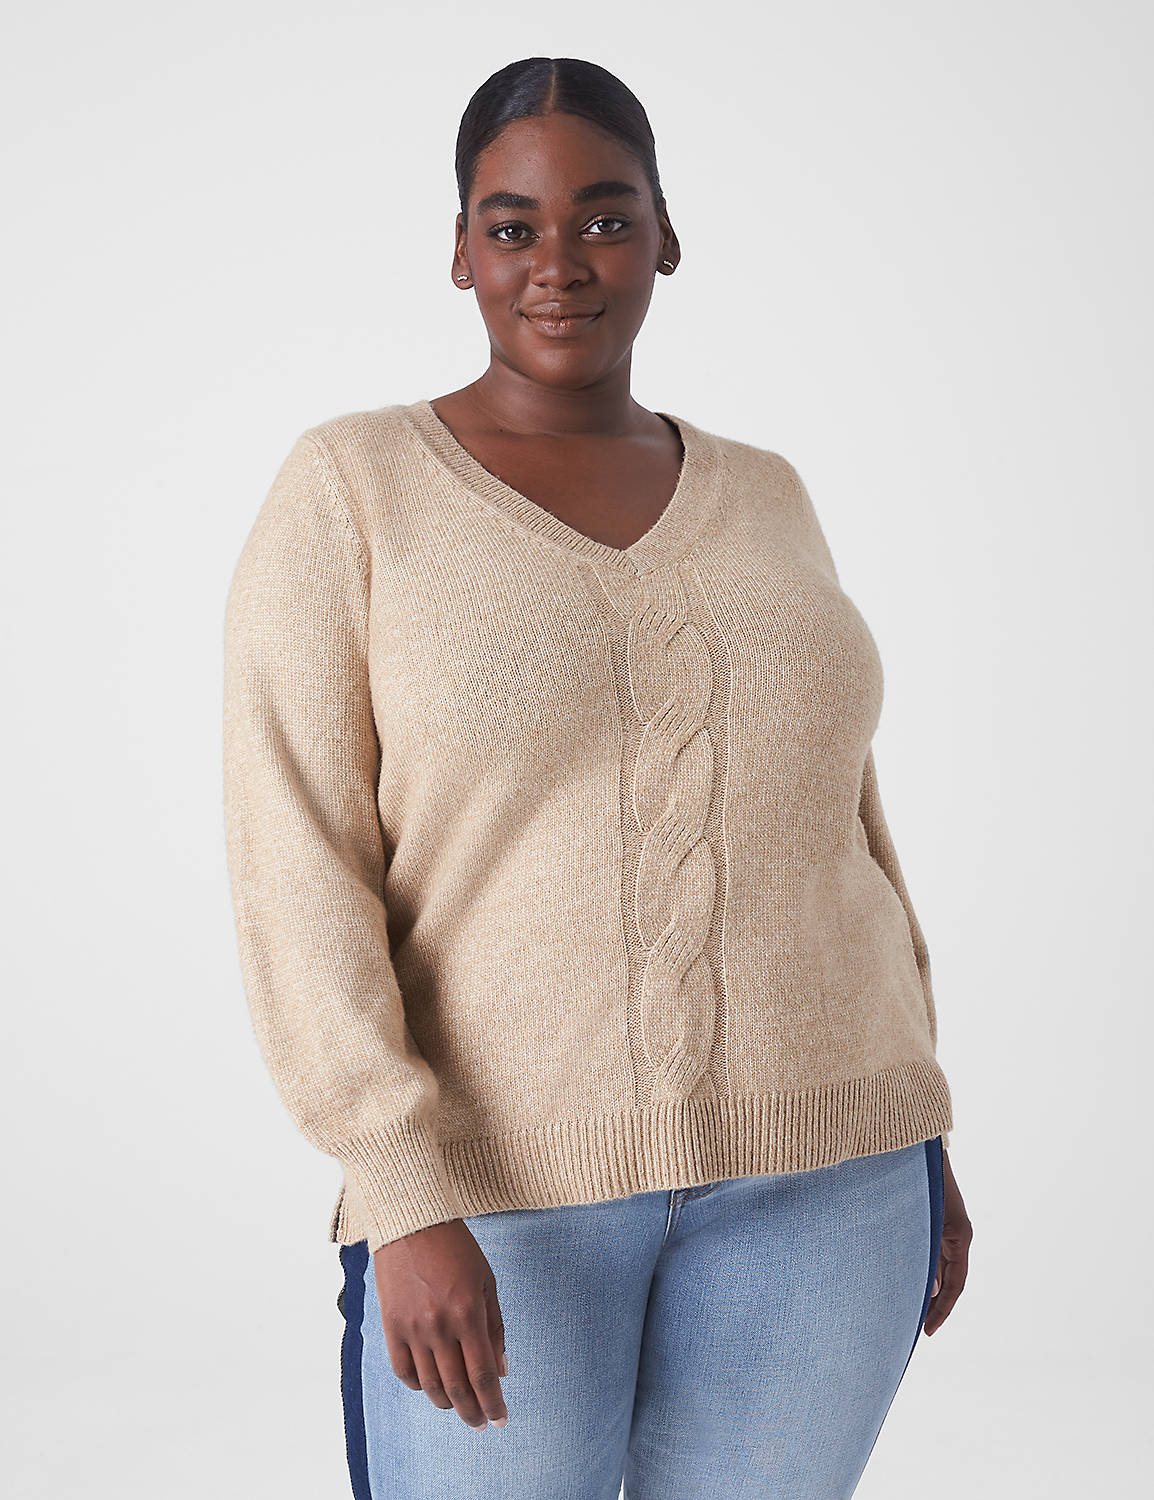 Classic Tunic Pullover Cable Knit Sweater | LaneBryant